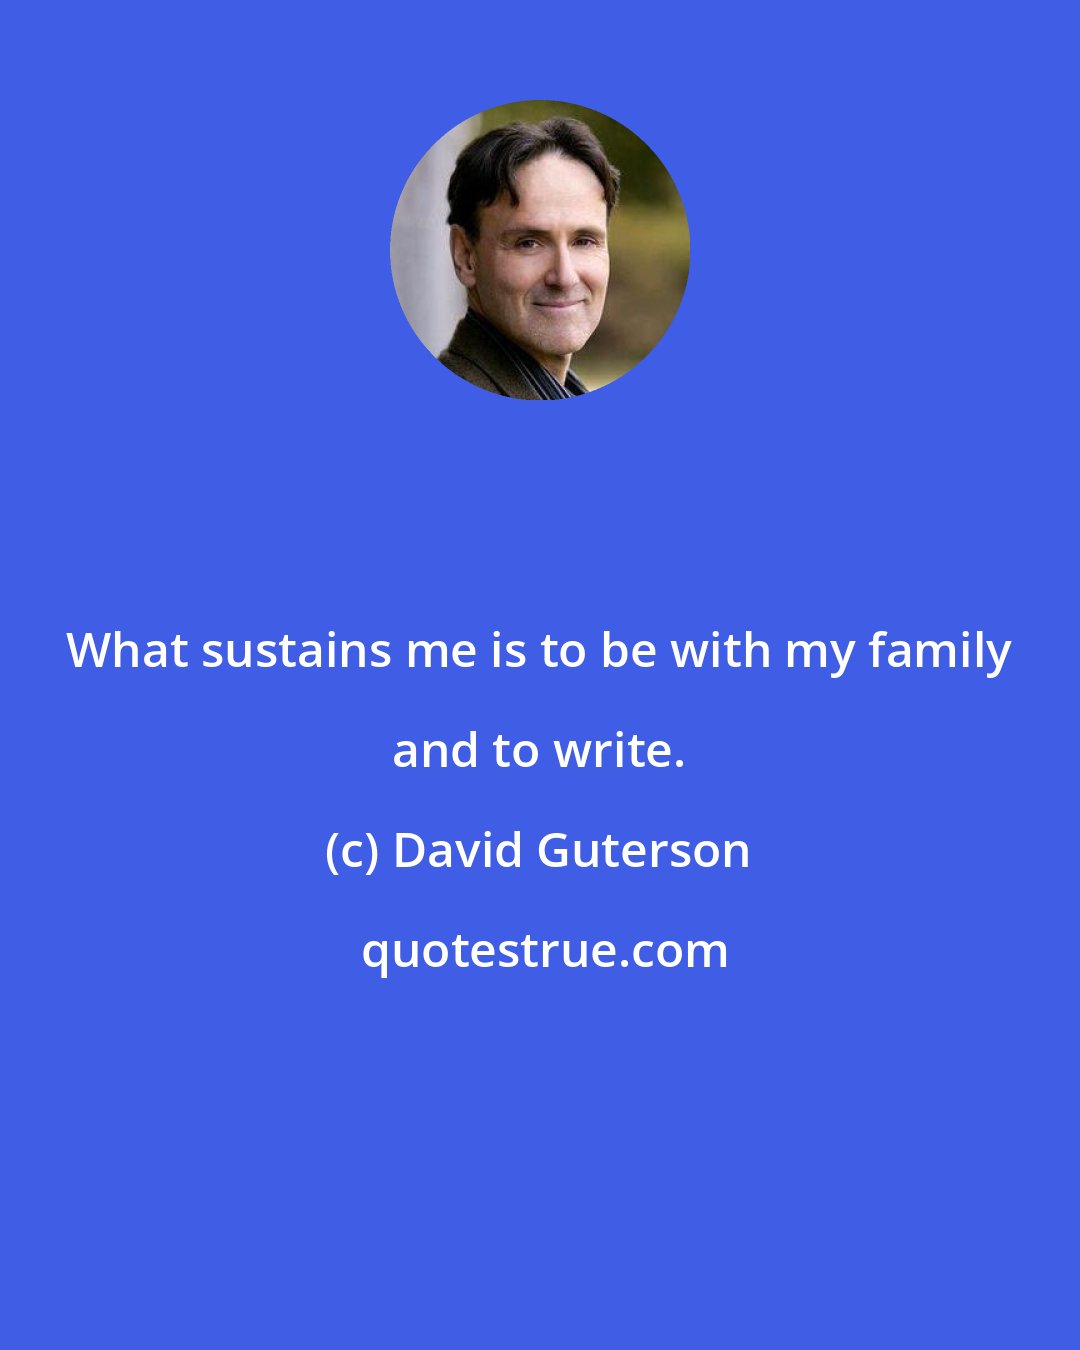 David Guterson: What sustains me is to be with my family and to write.